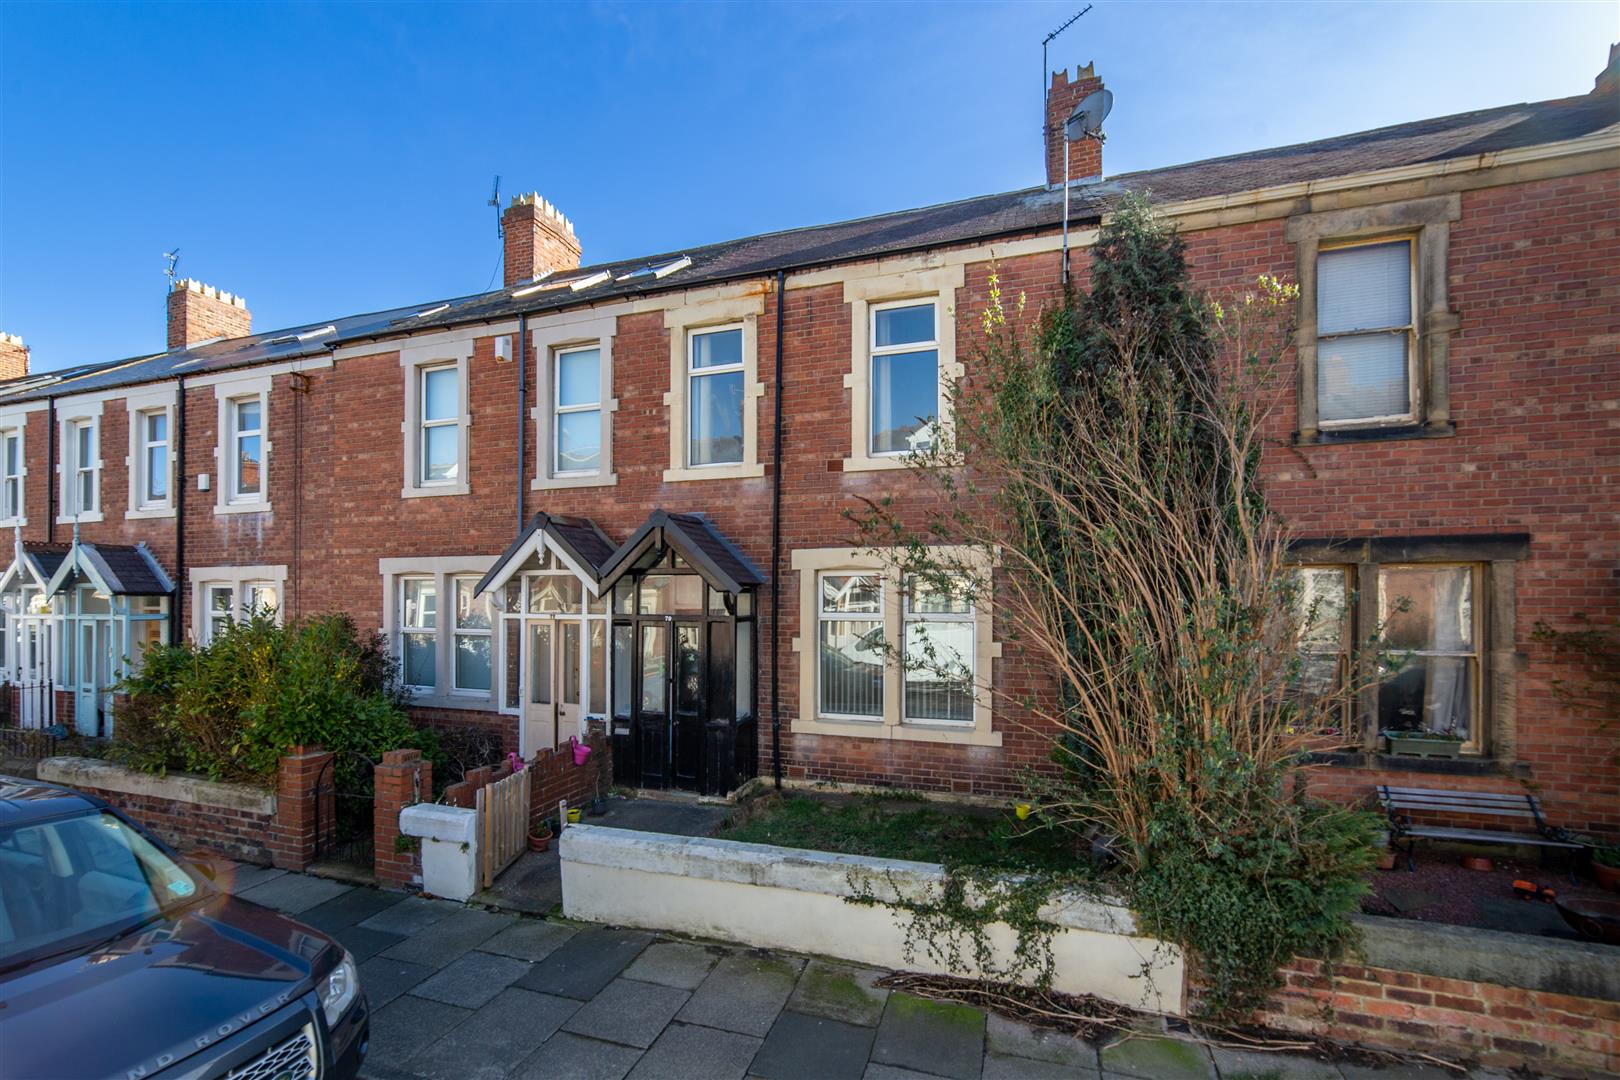 4 bed terraced house for sale in Windsor Terrace, South Gosforth, NE3 